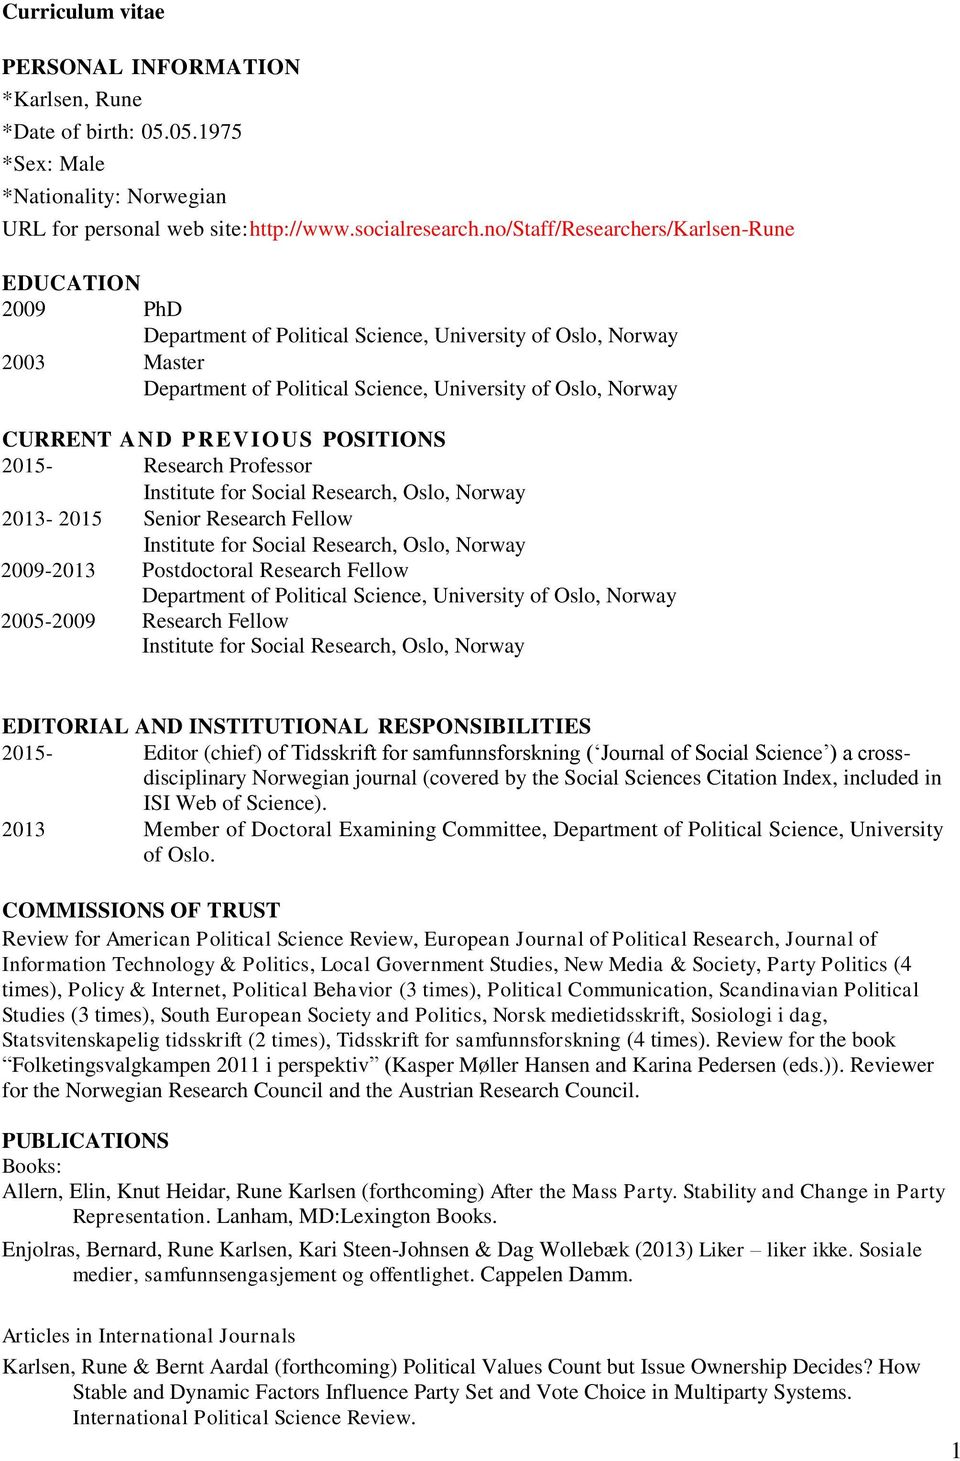 PREVIOUS POSITIONS 2015- Research Professor Institute for Social Research, Oslo, Norway 2013-2015 Senior Research Fellow Institute for Social Research, Oslo, Norway 2009-2013 Postdoctoral Research